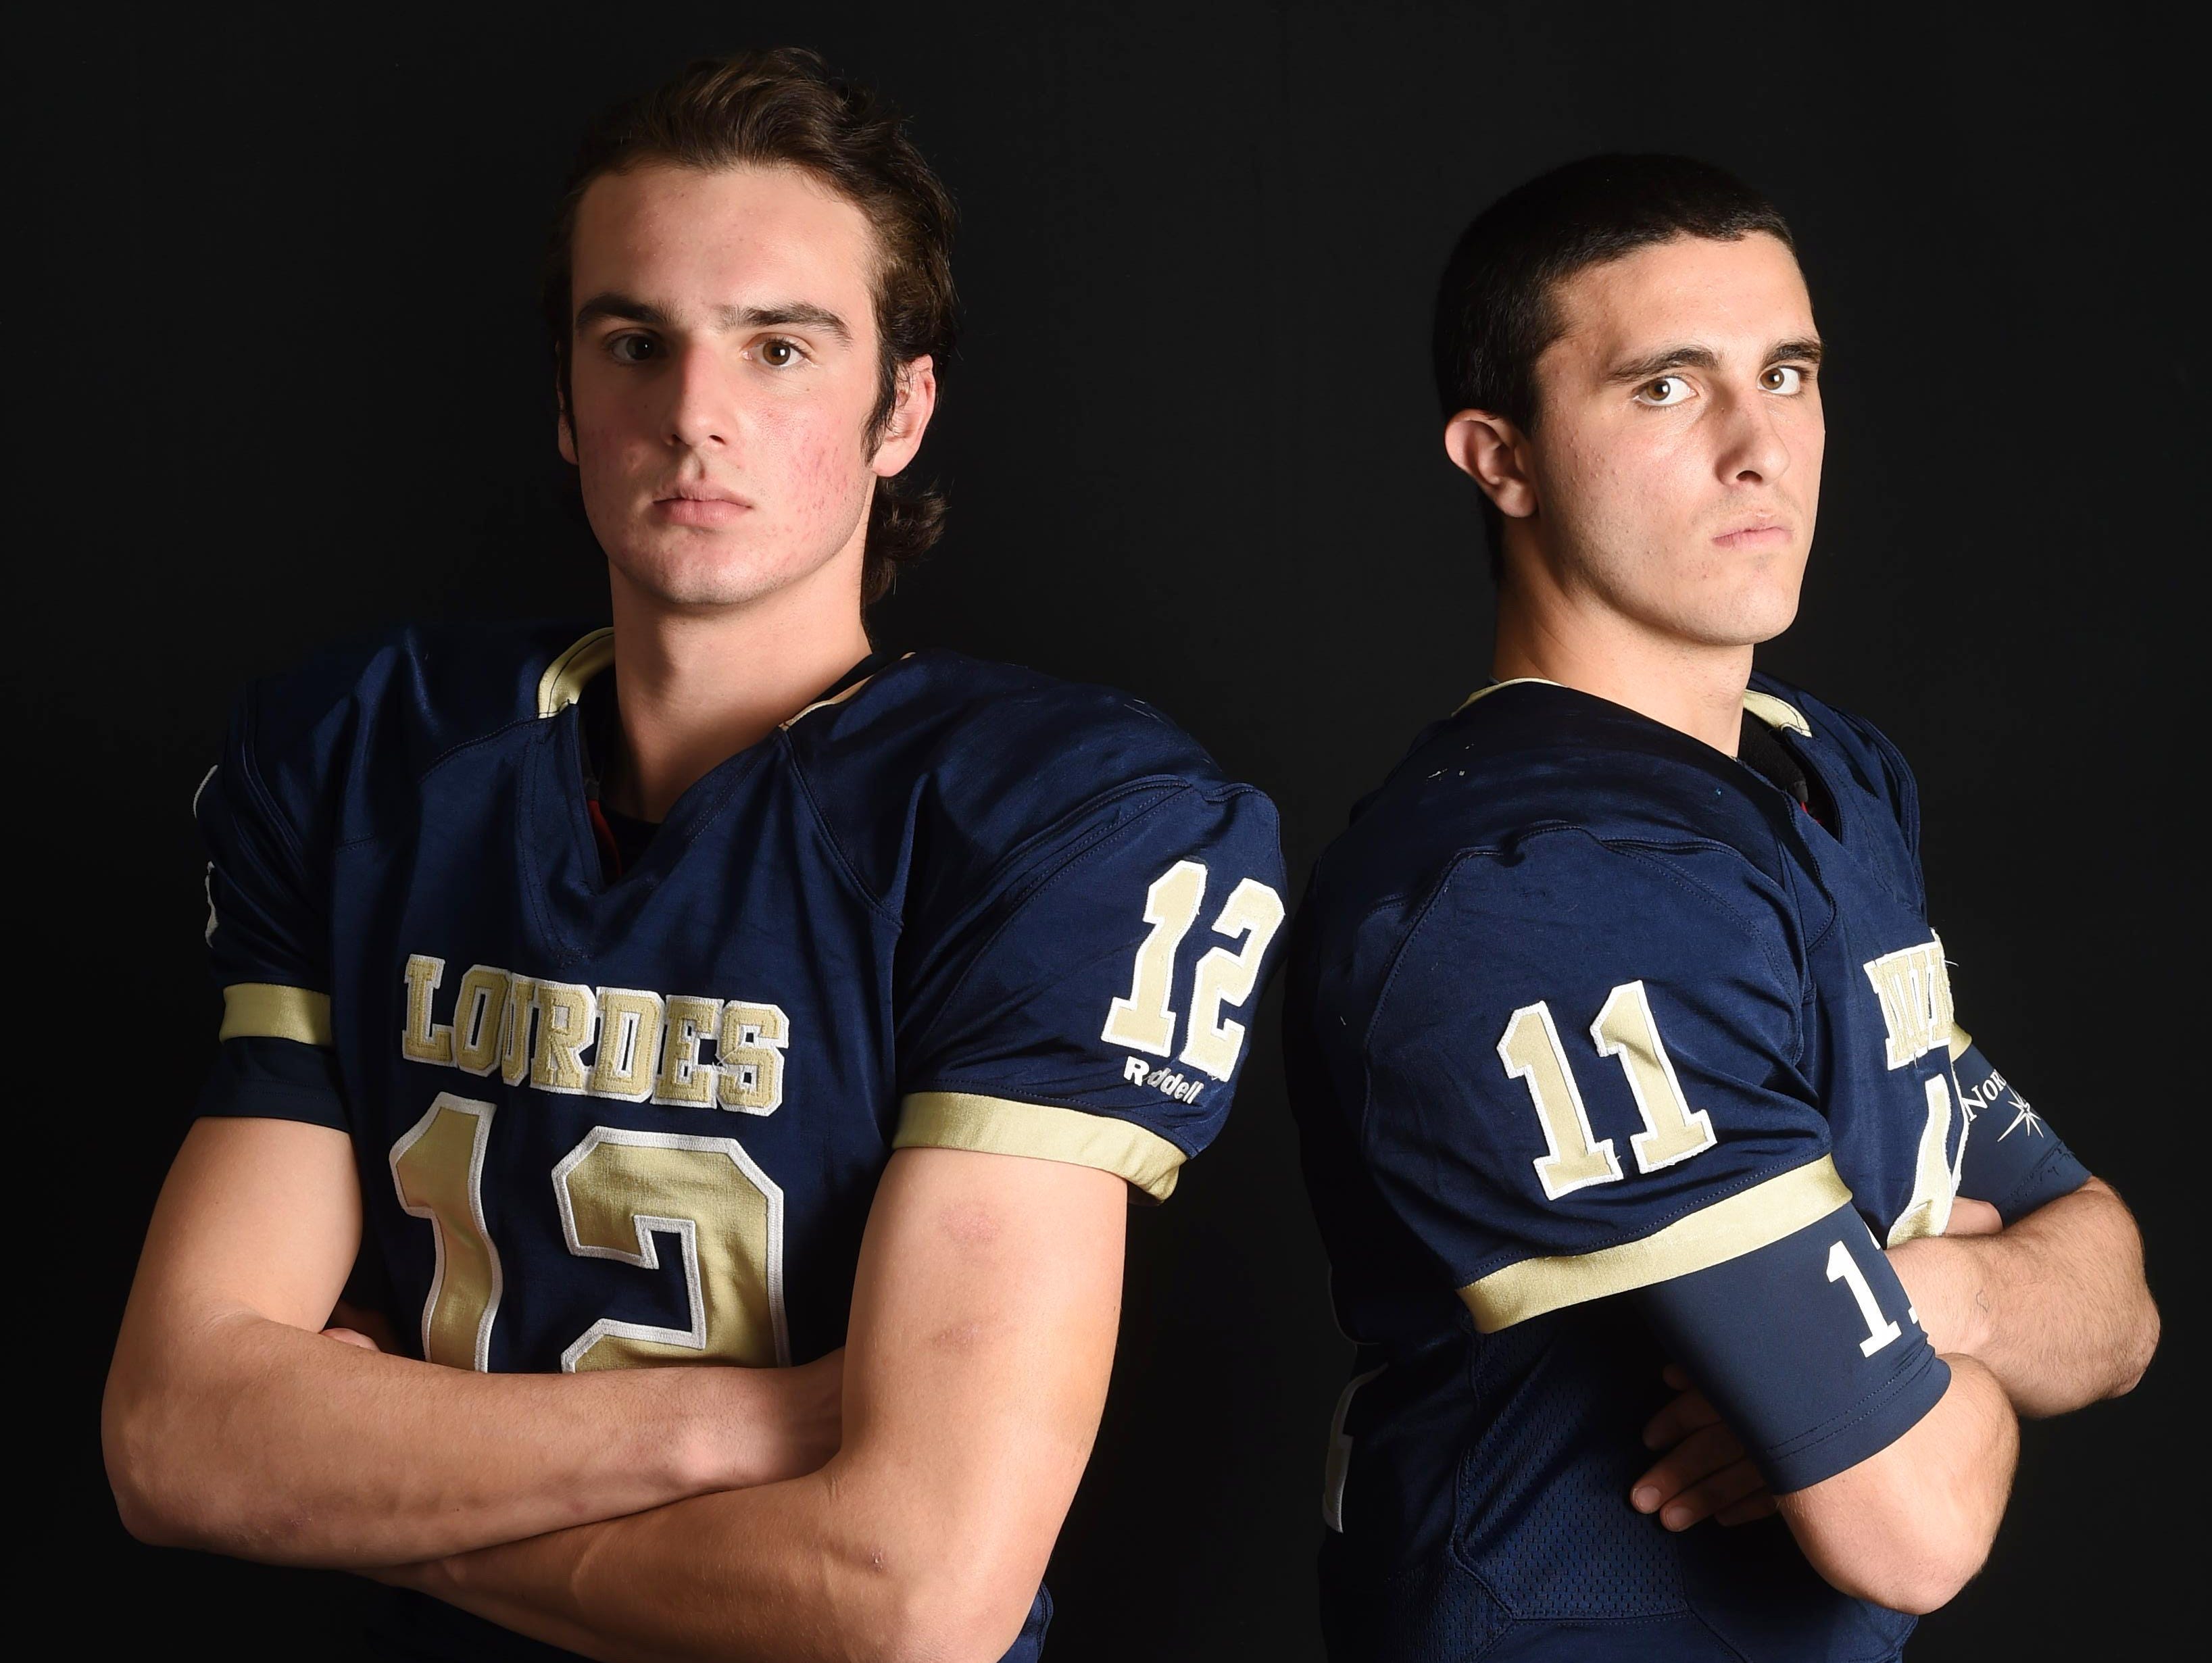 Luke Timm, left, and Dean Rotger, are the Co-Offensive Players of the Year.